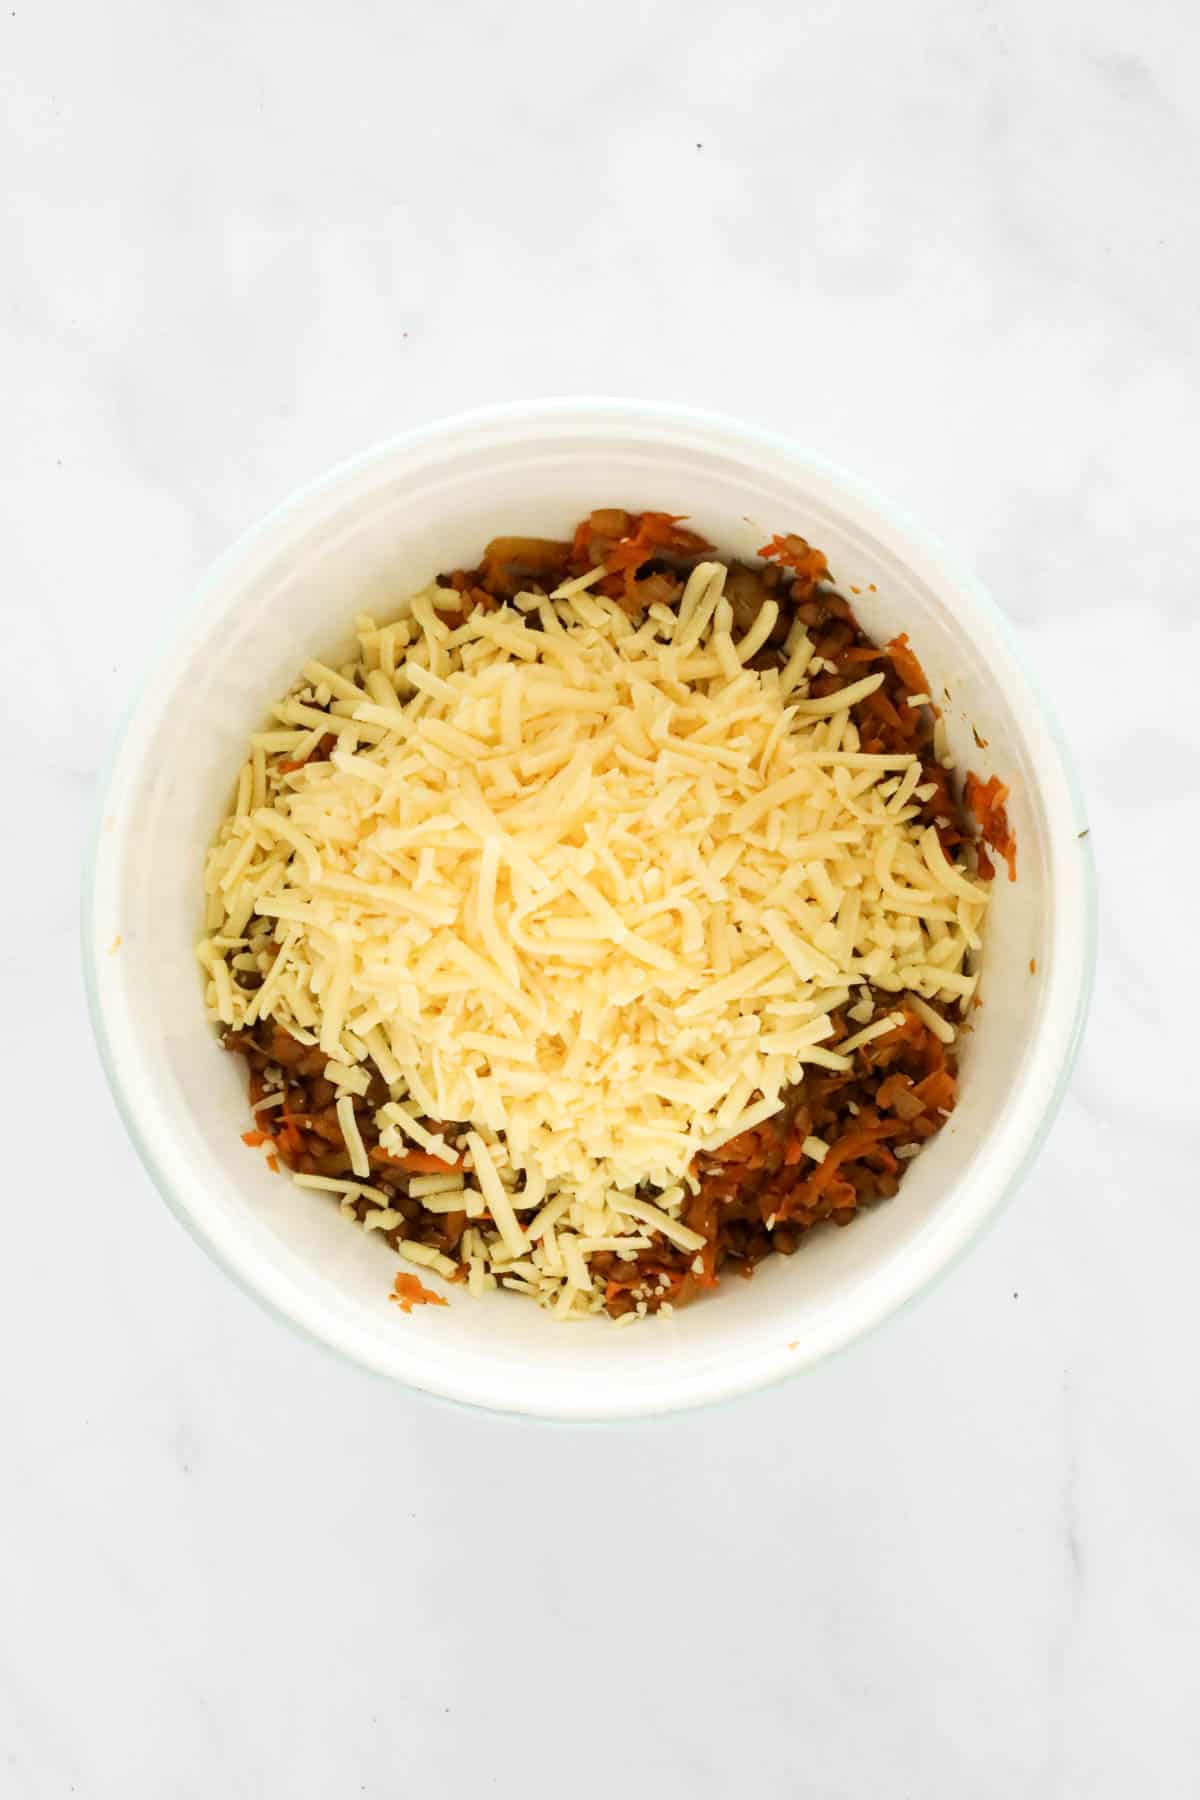 Grated cheese on top of cooled lentil and vegetable filling in a white bowl.